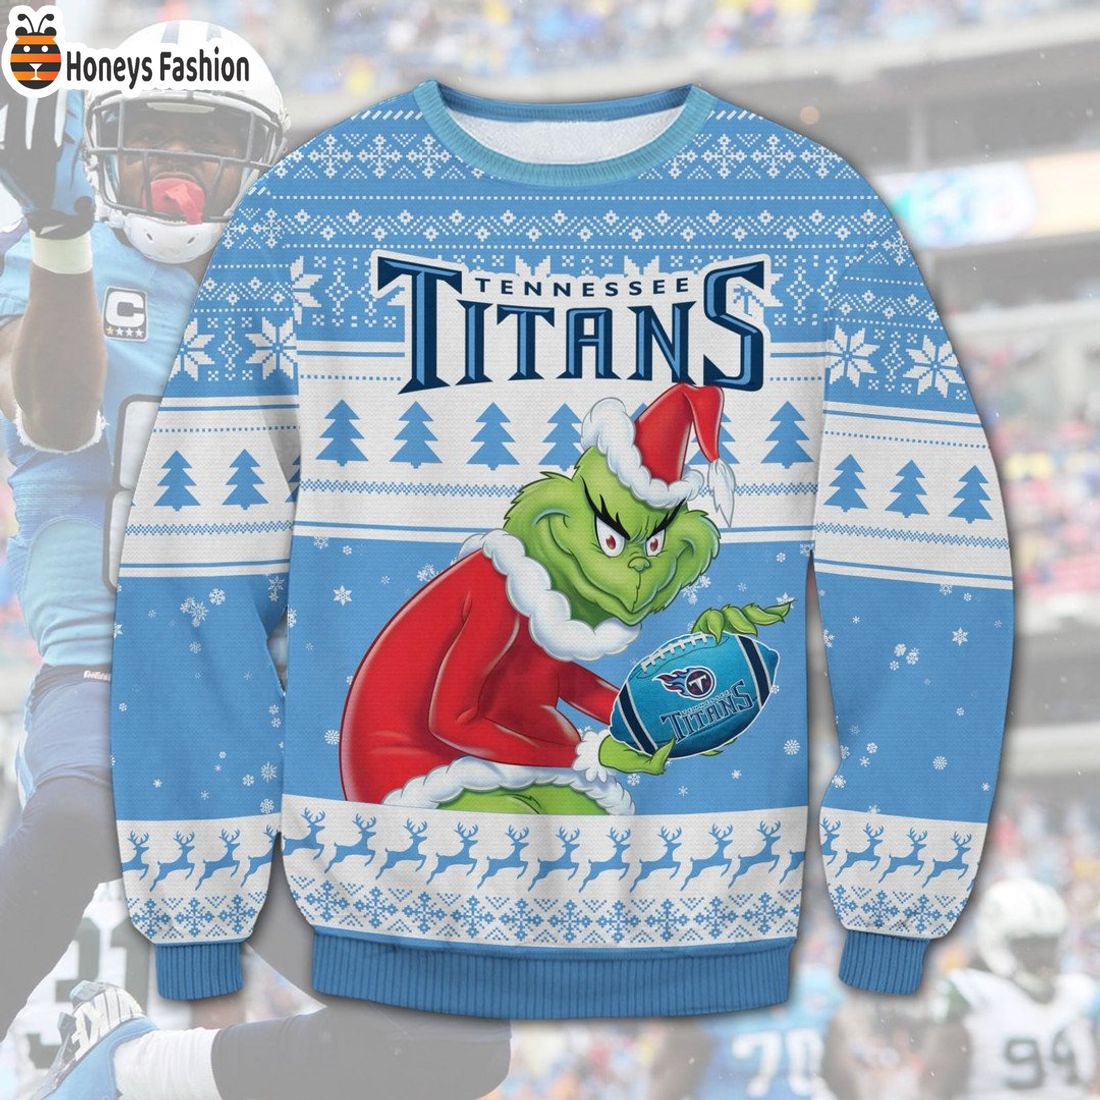 TRENDING Tennessee Titans NFL Grinch Ugly Christmas Sweater